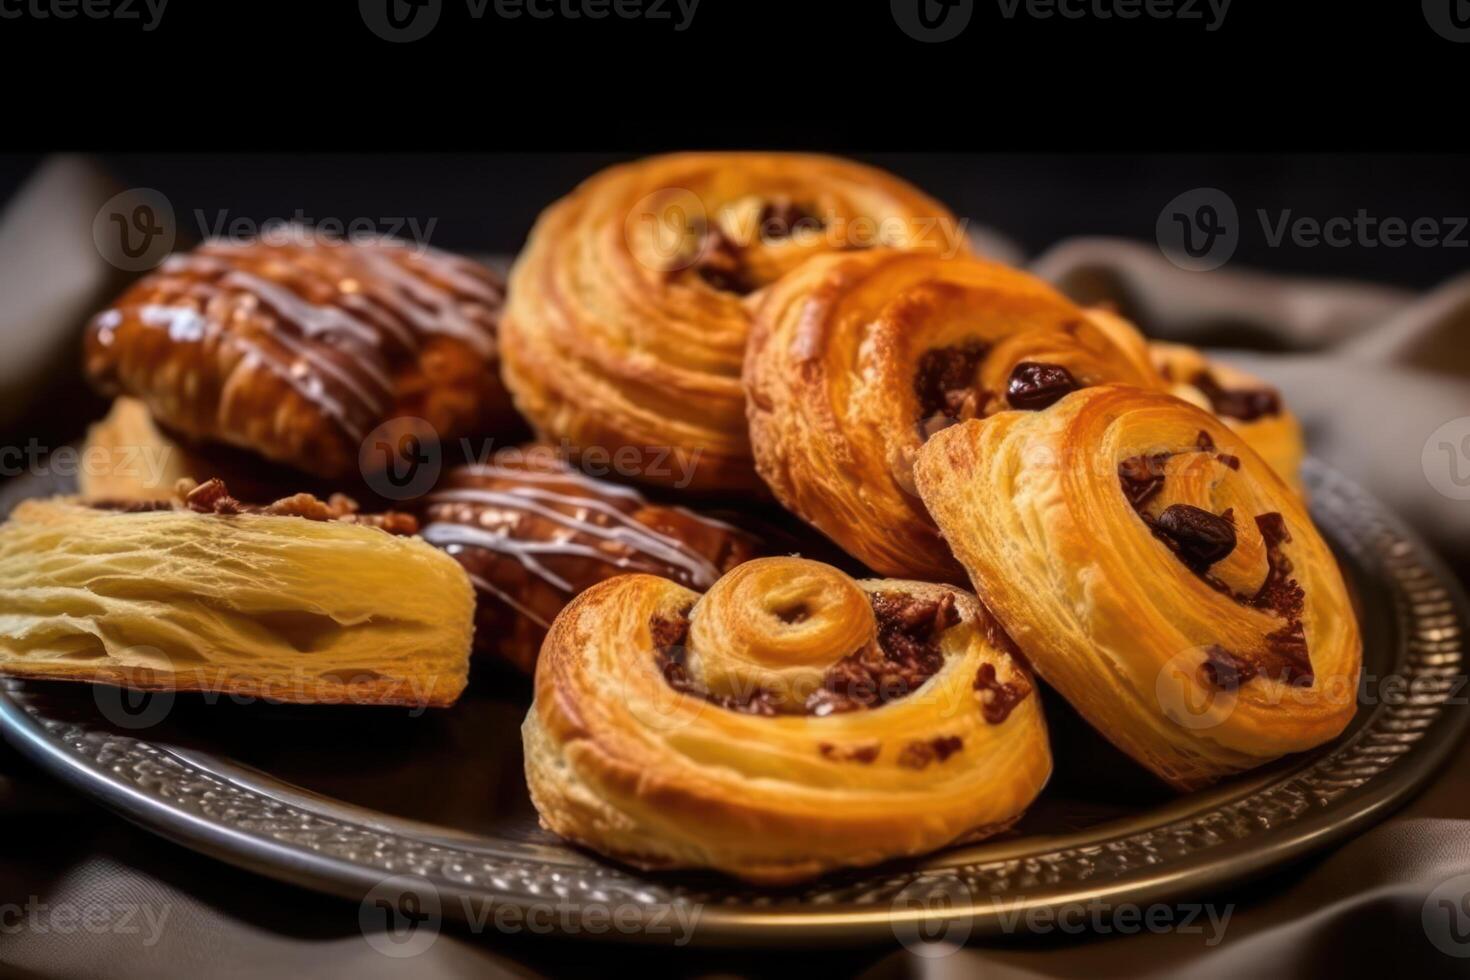 stock photo of Viennoiserie with choco chips Viennoiserie are French baked food photography